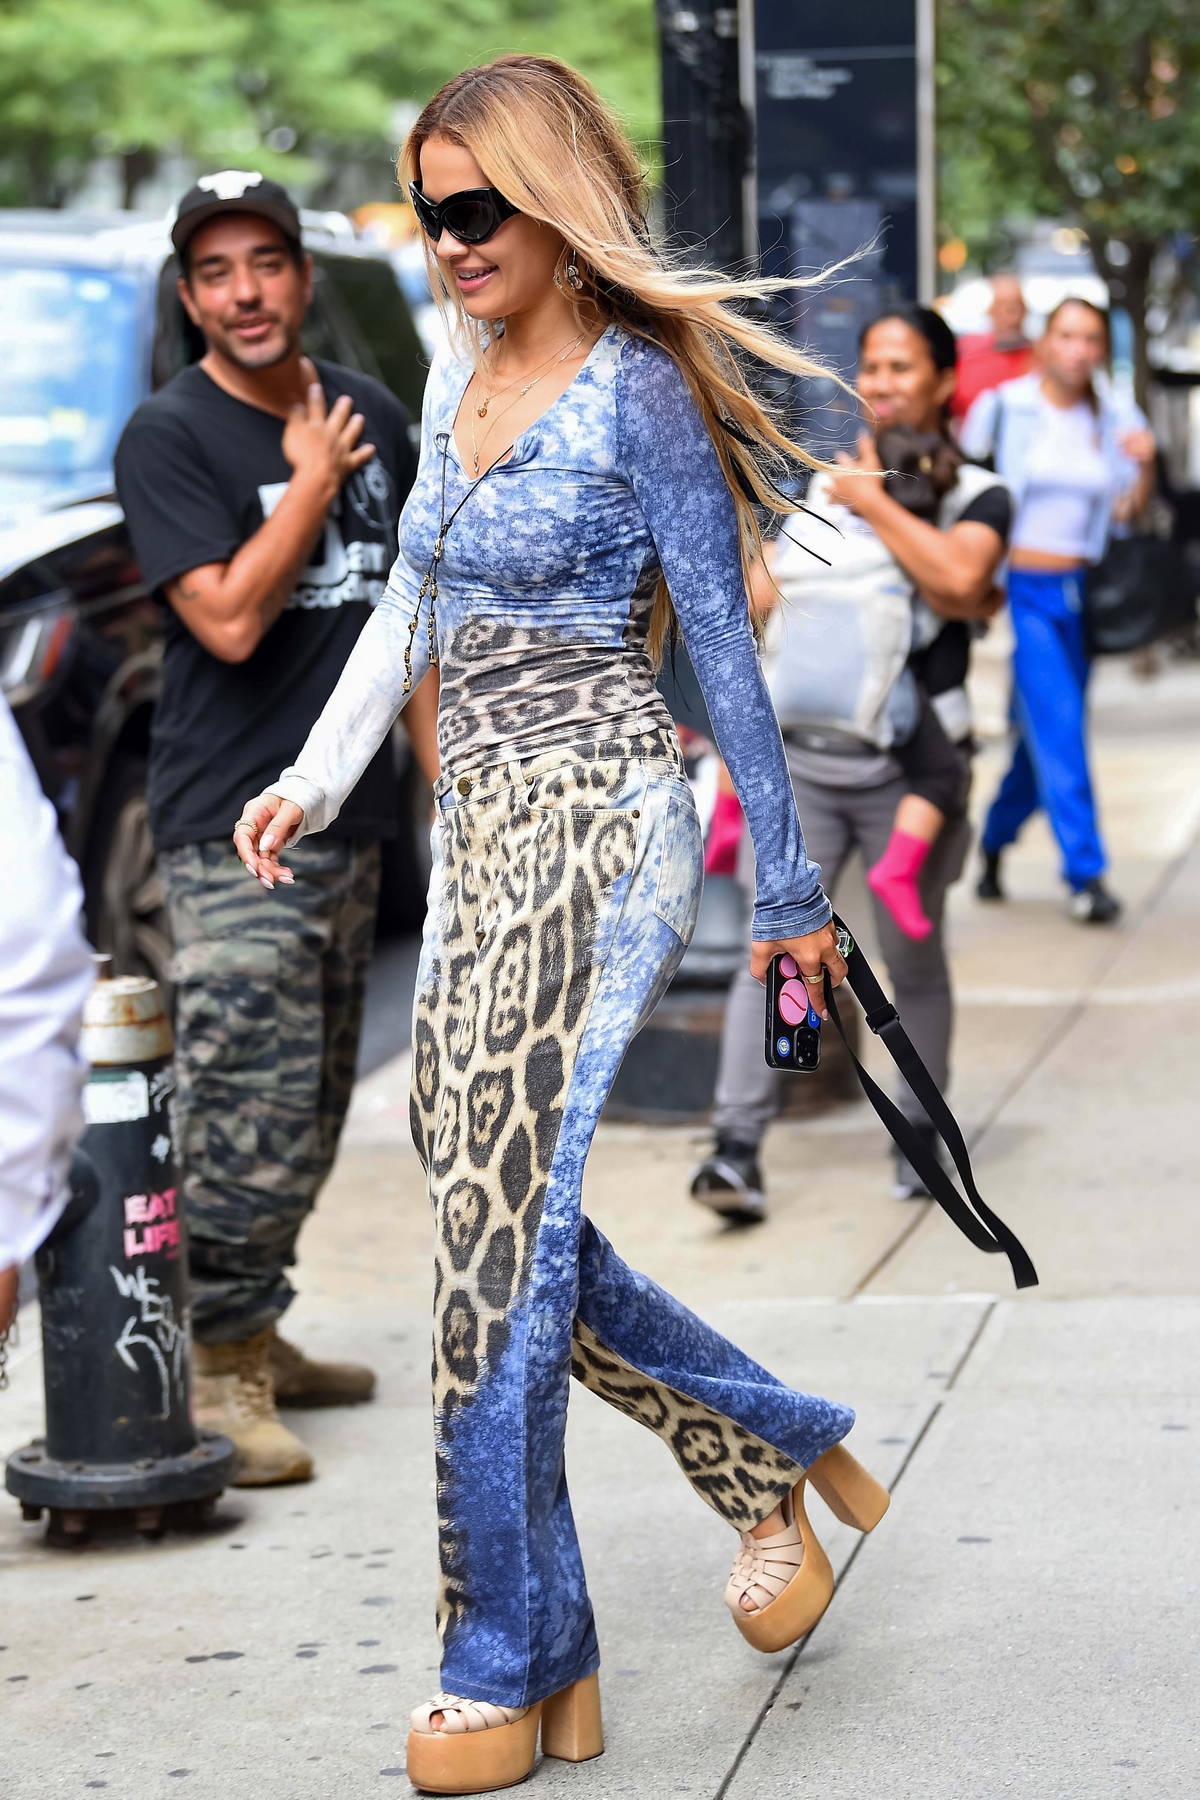 Rita Ora looks stylish in an animal print outfit while heading out